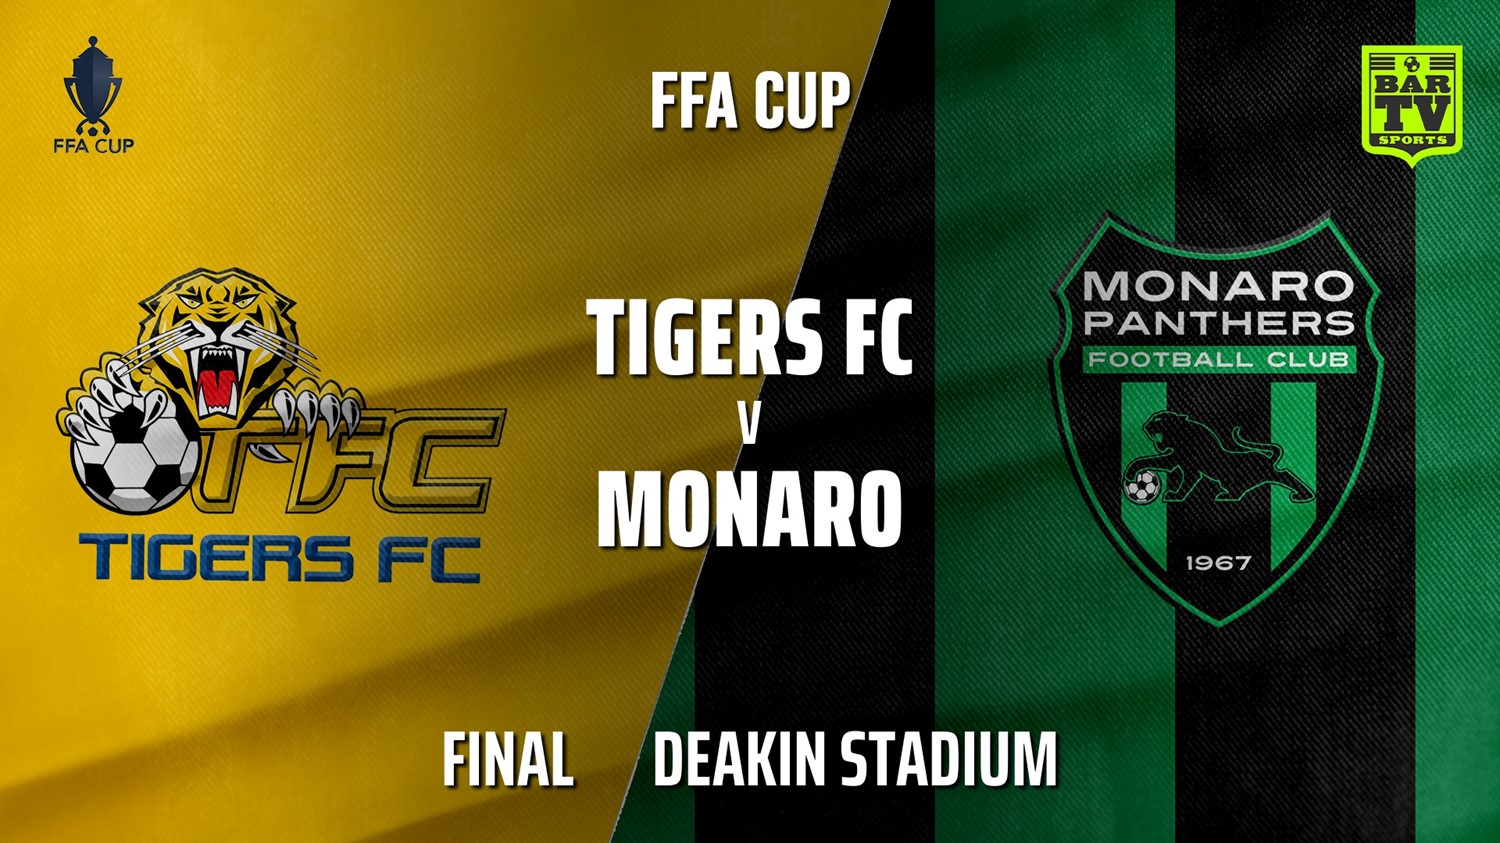 210605-FFA Cup Qualifying Canberra Final - Tigers FC v Monaro Panthers FC Minigame Slate Image